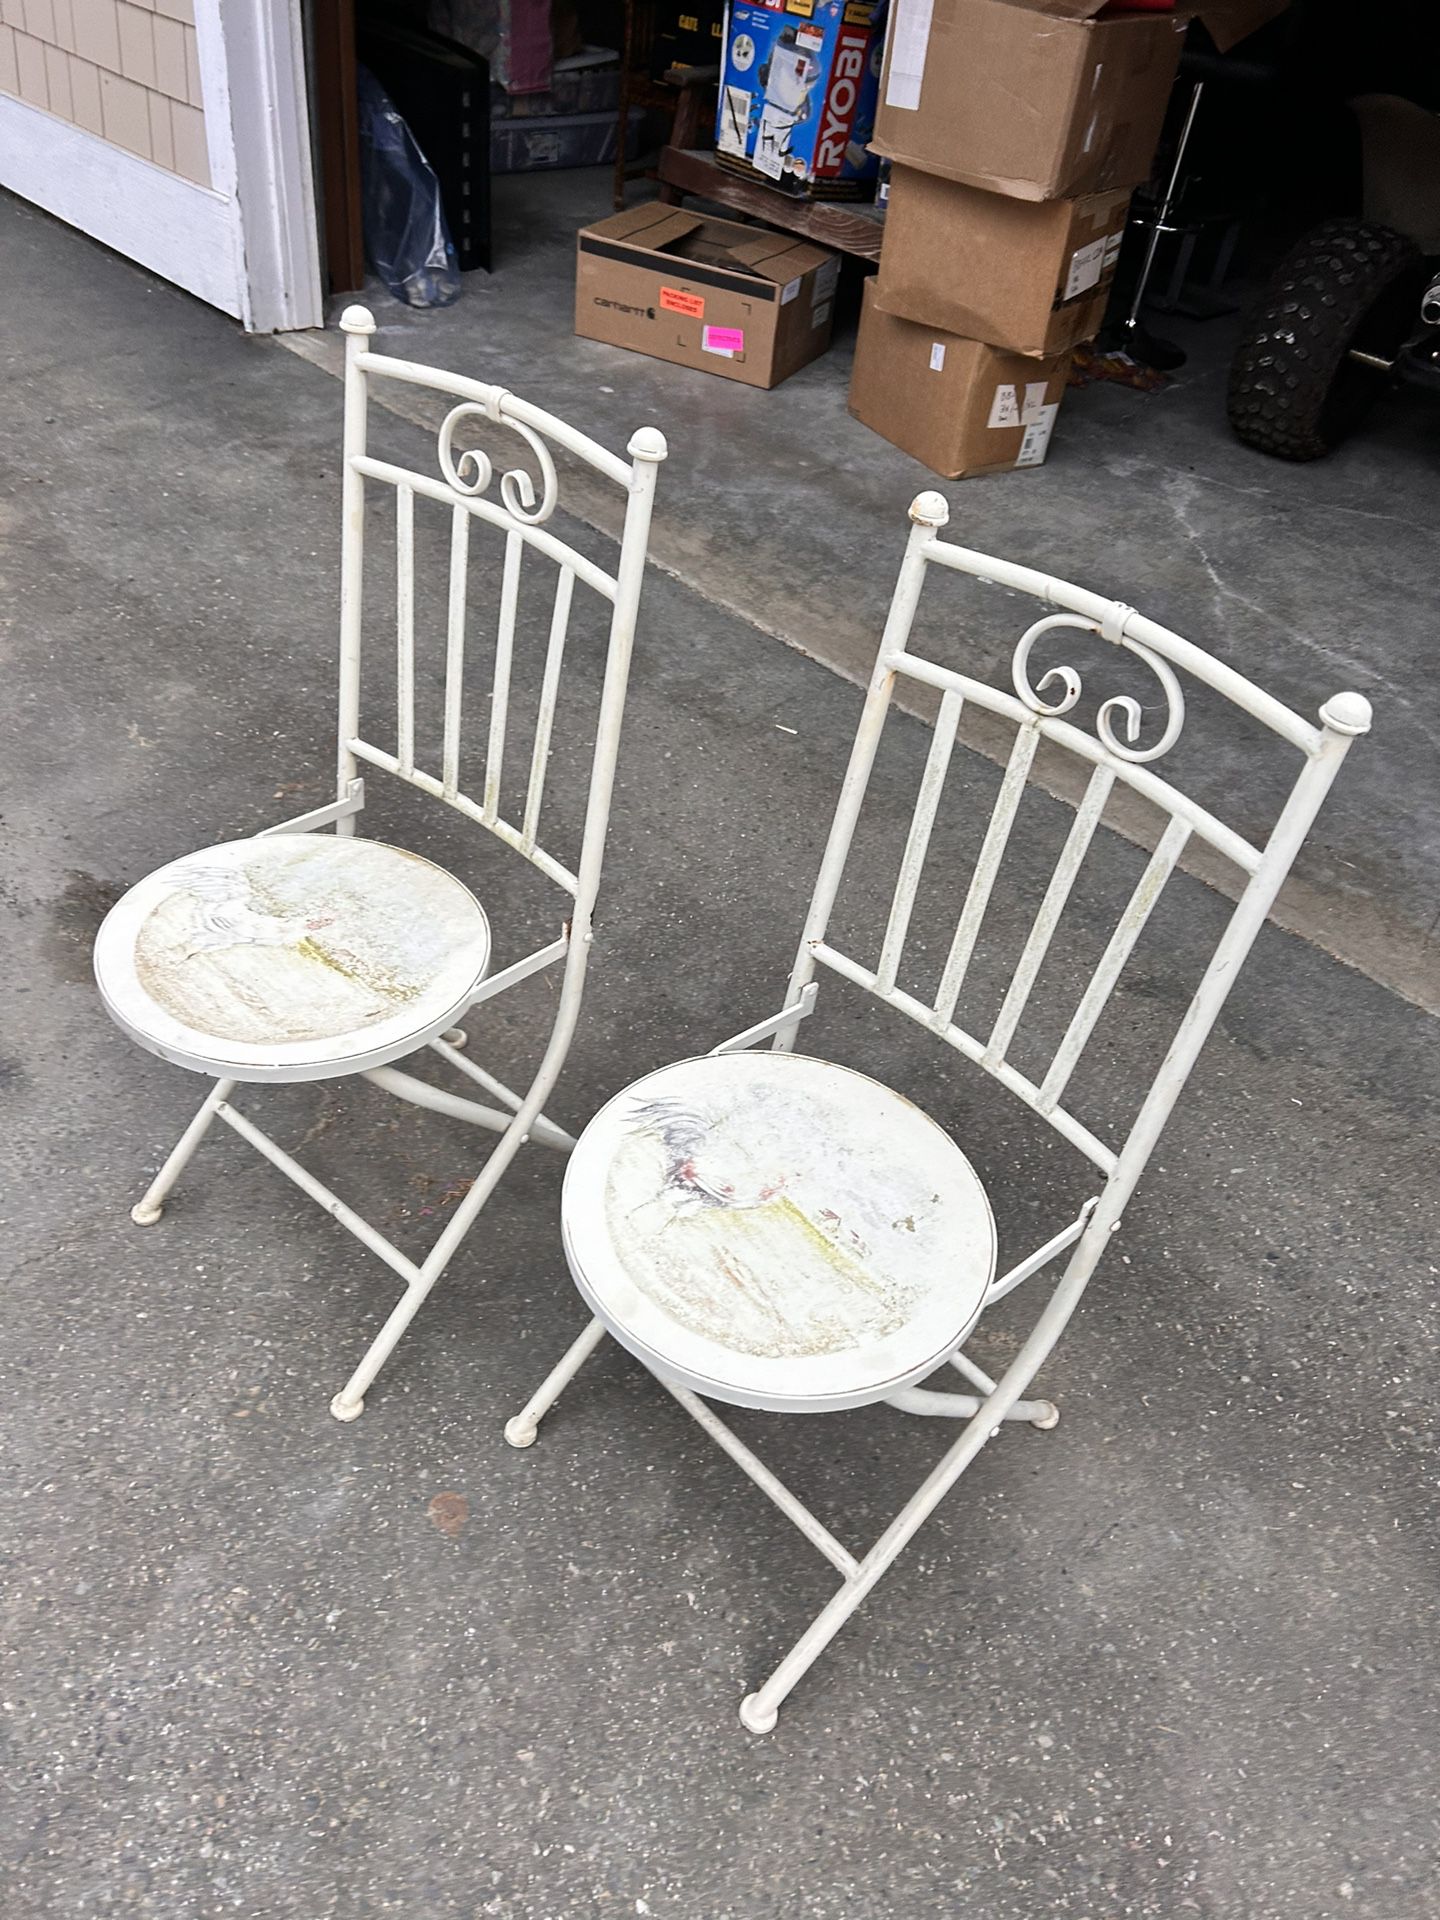 Chairs H